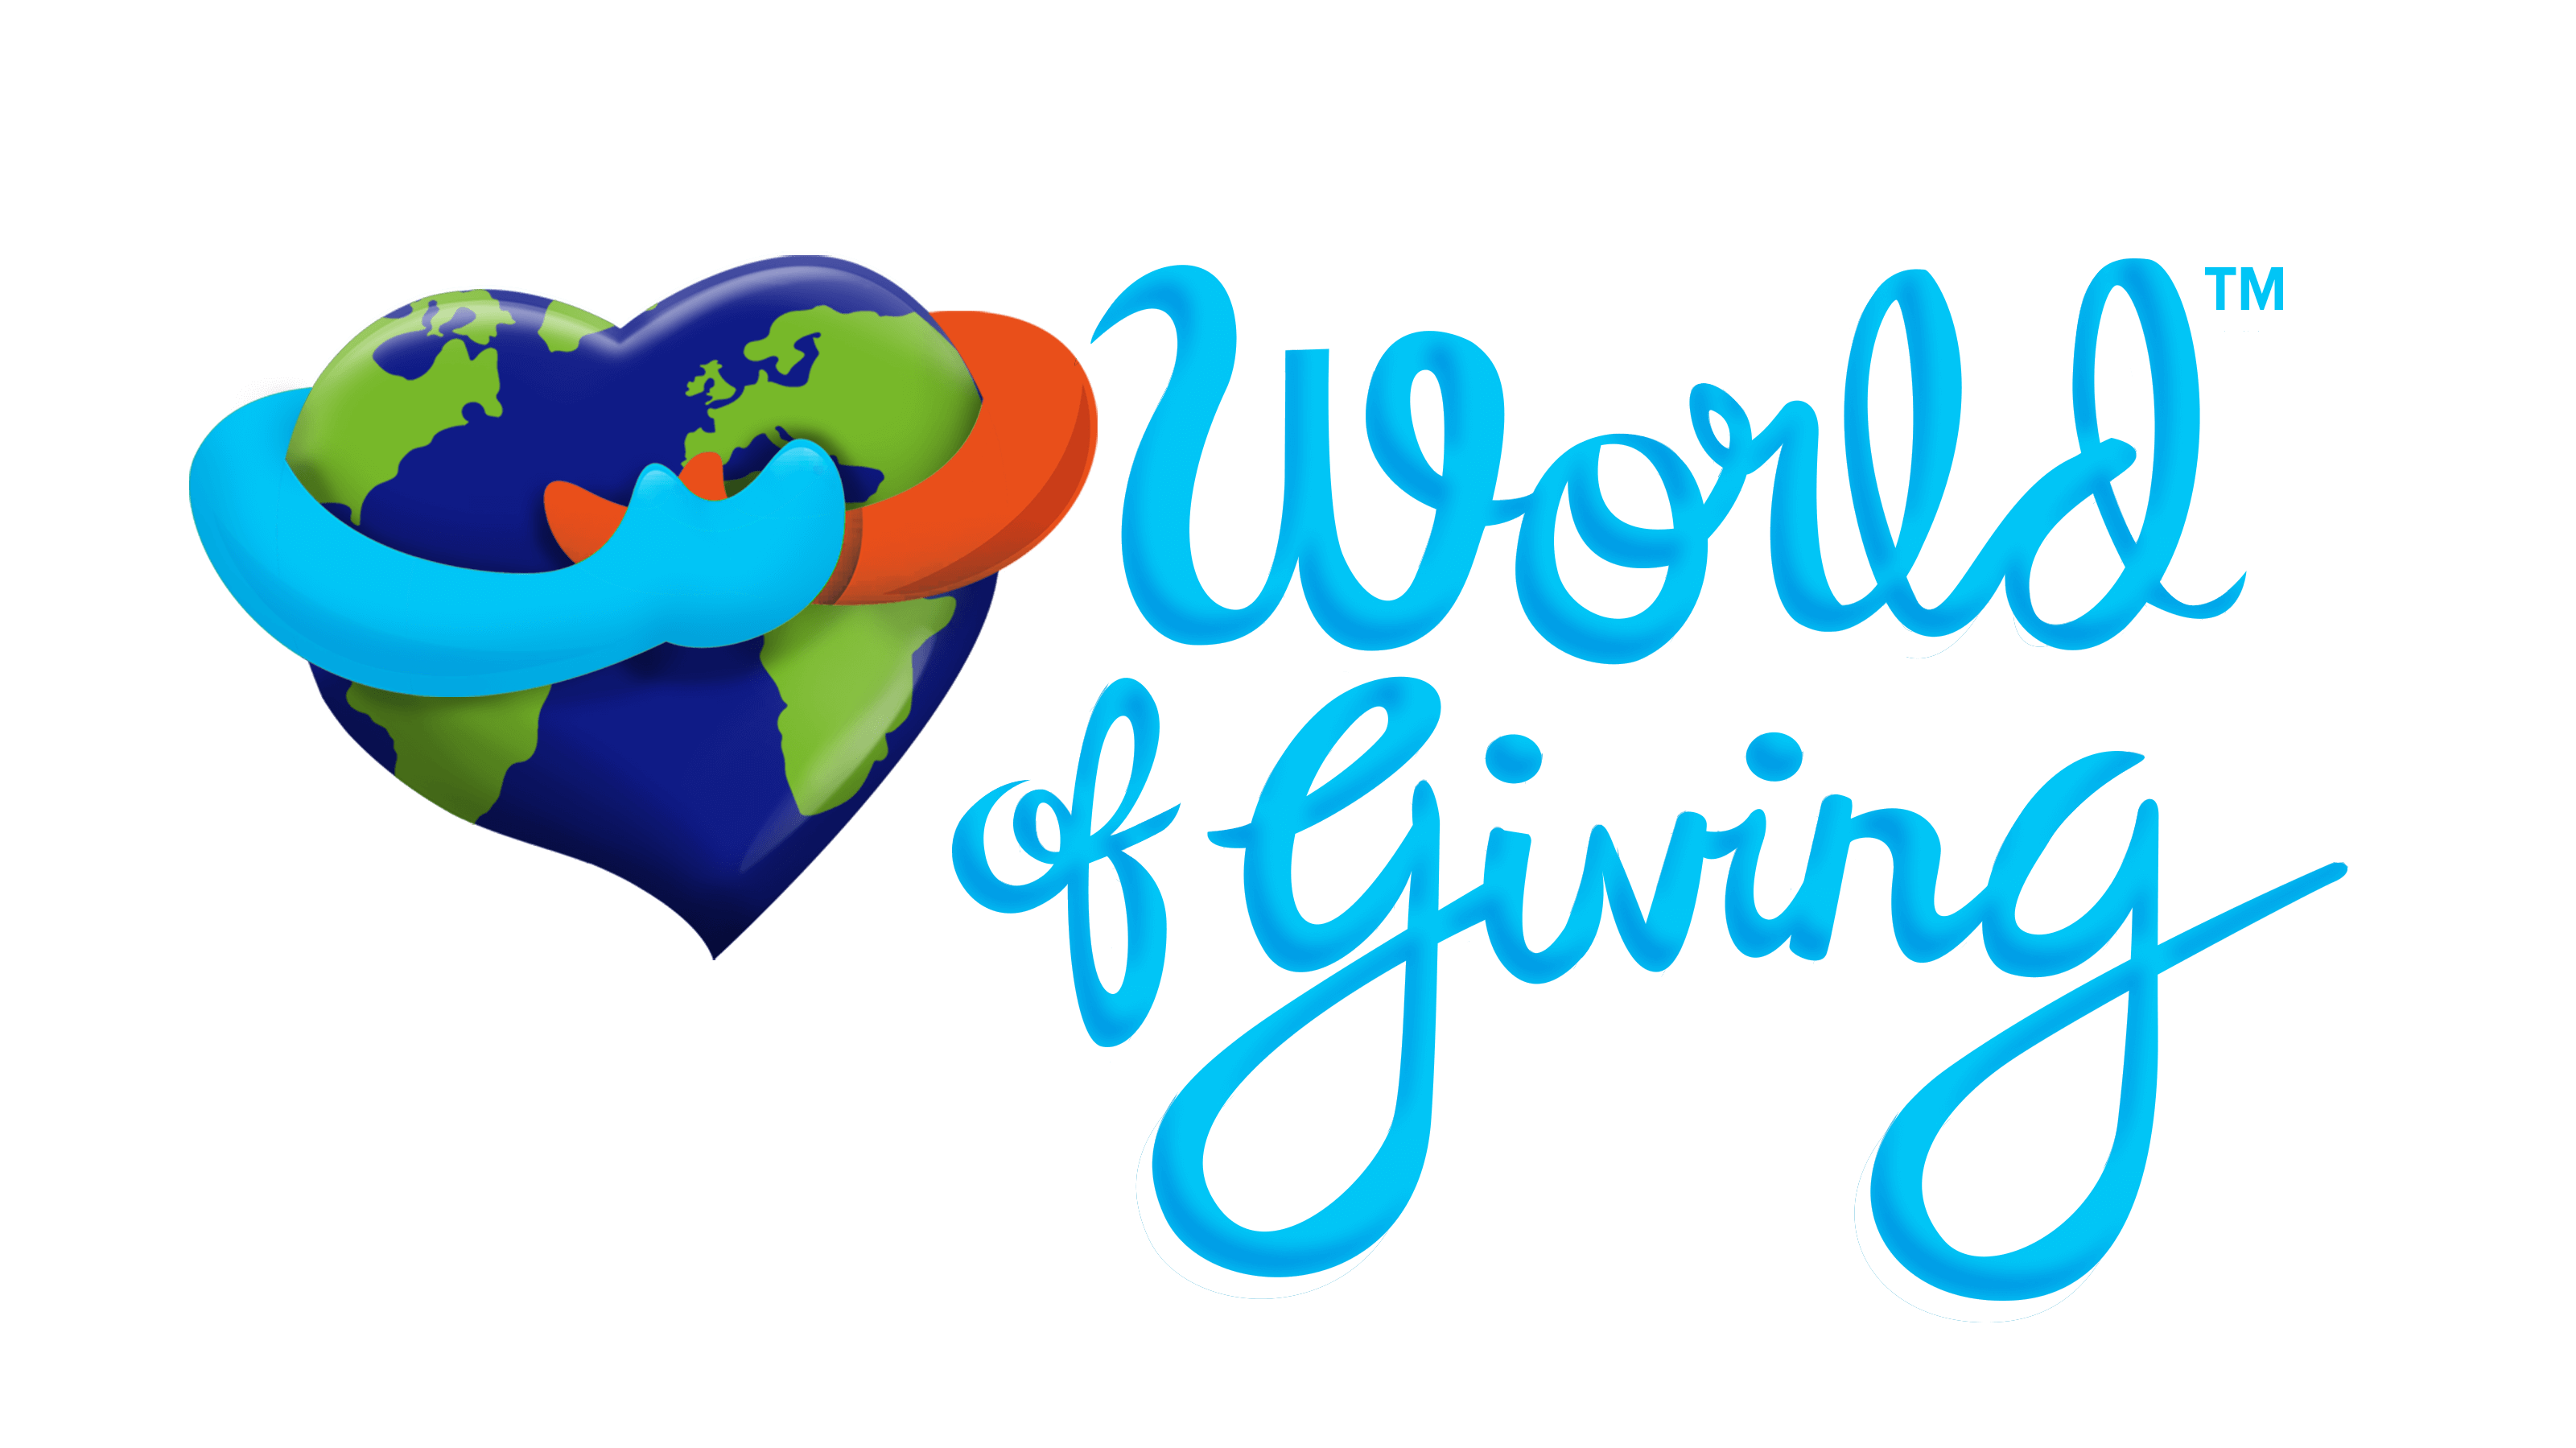 World of Giving